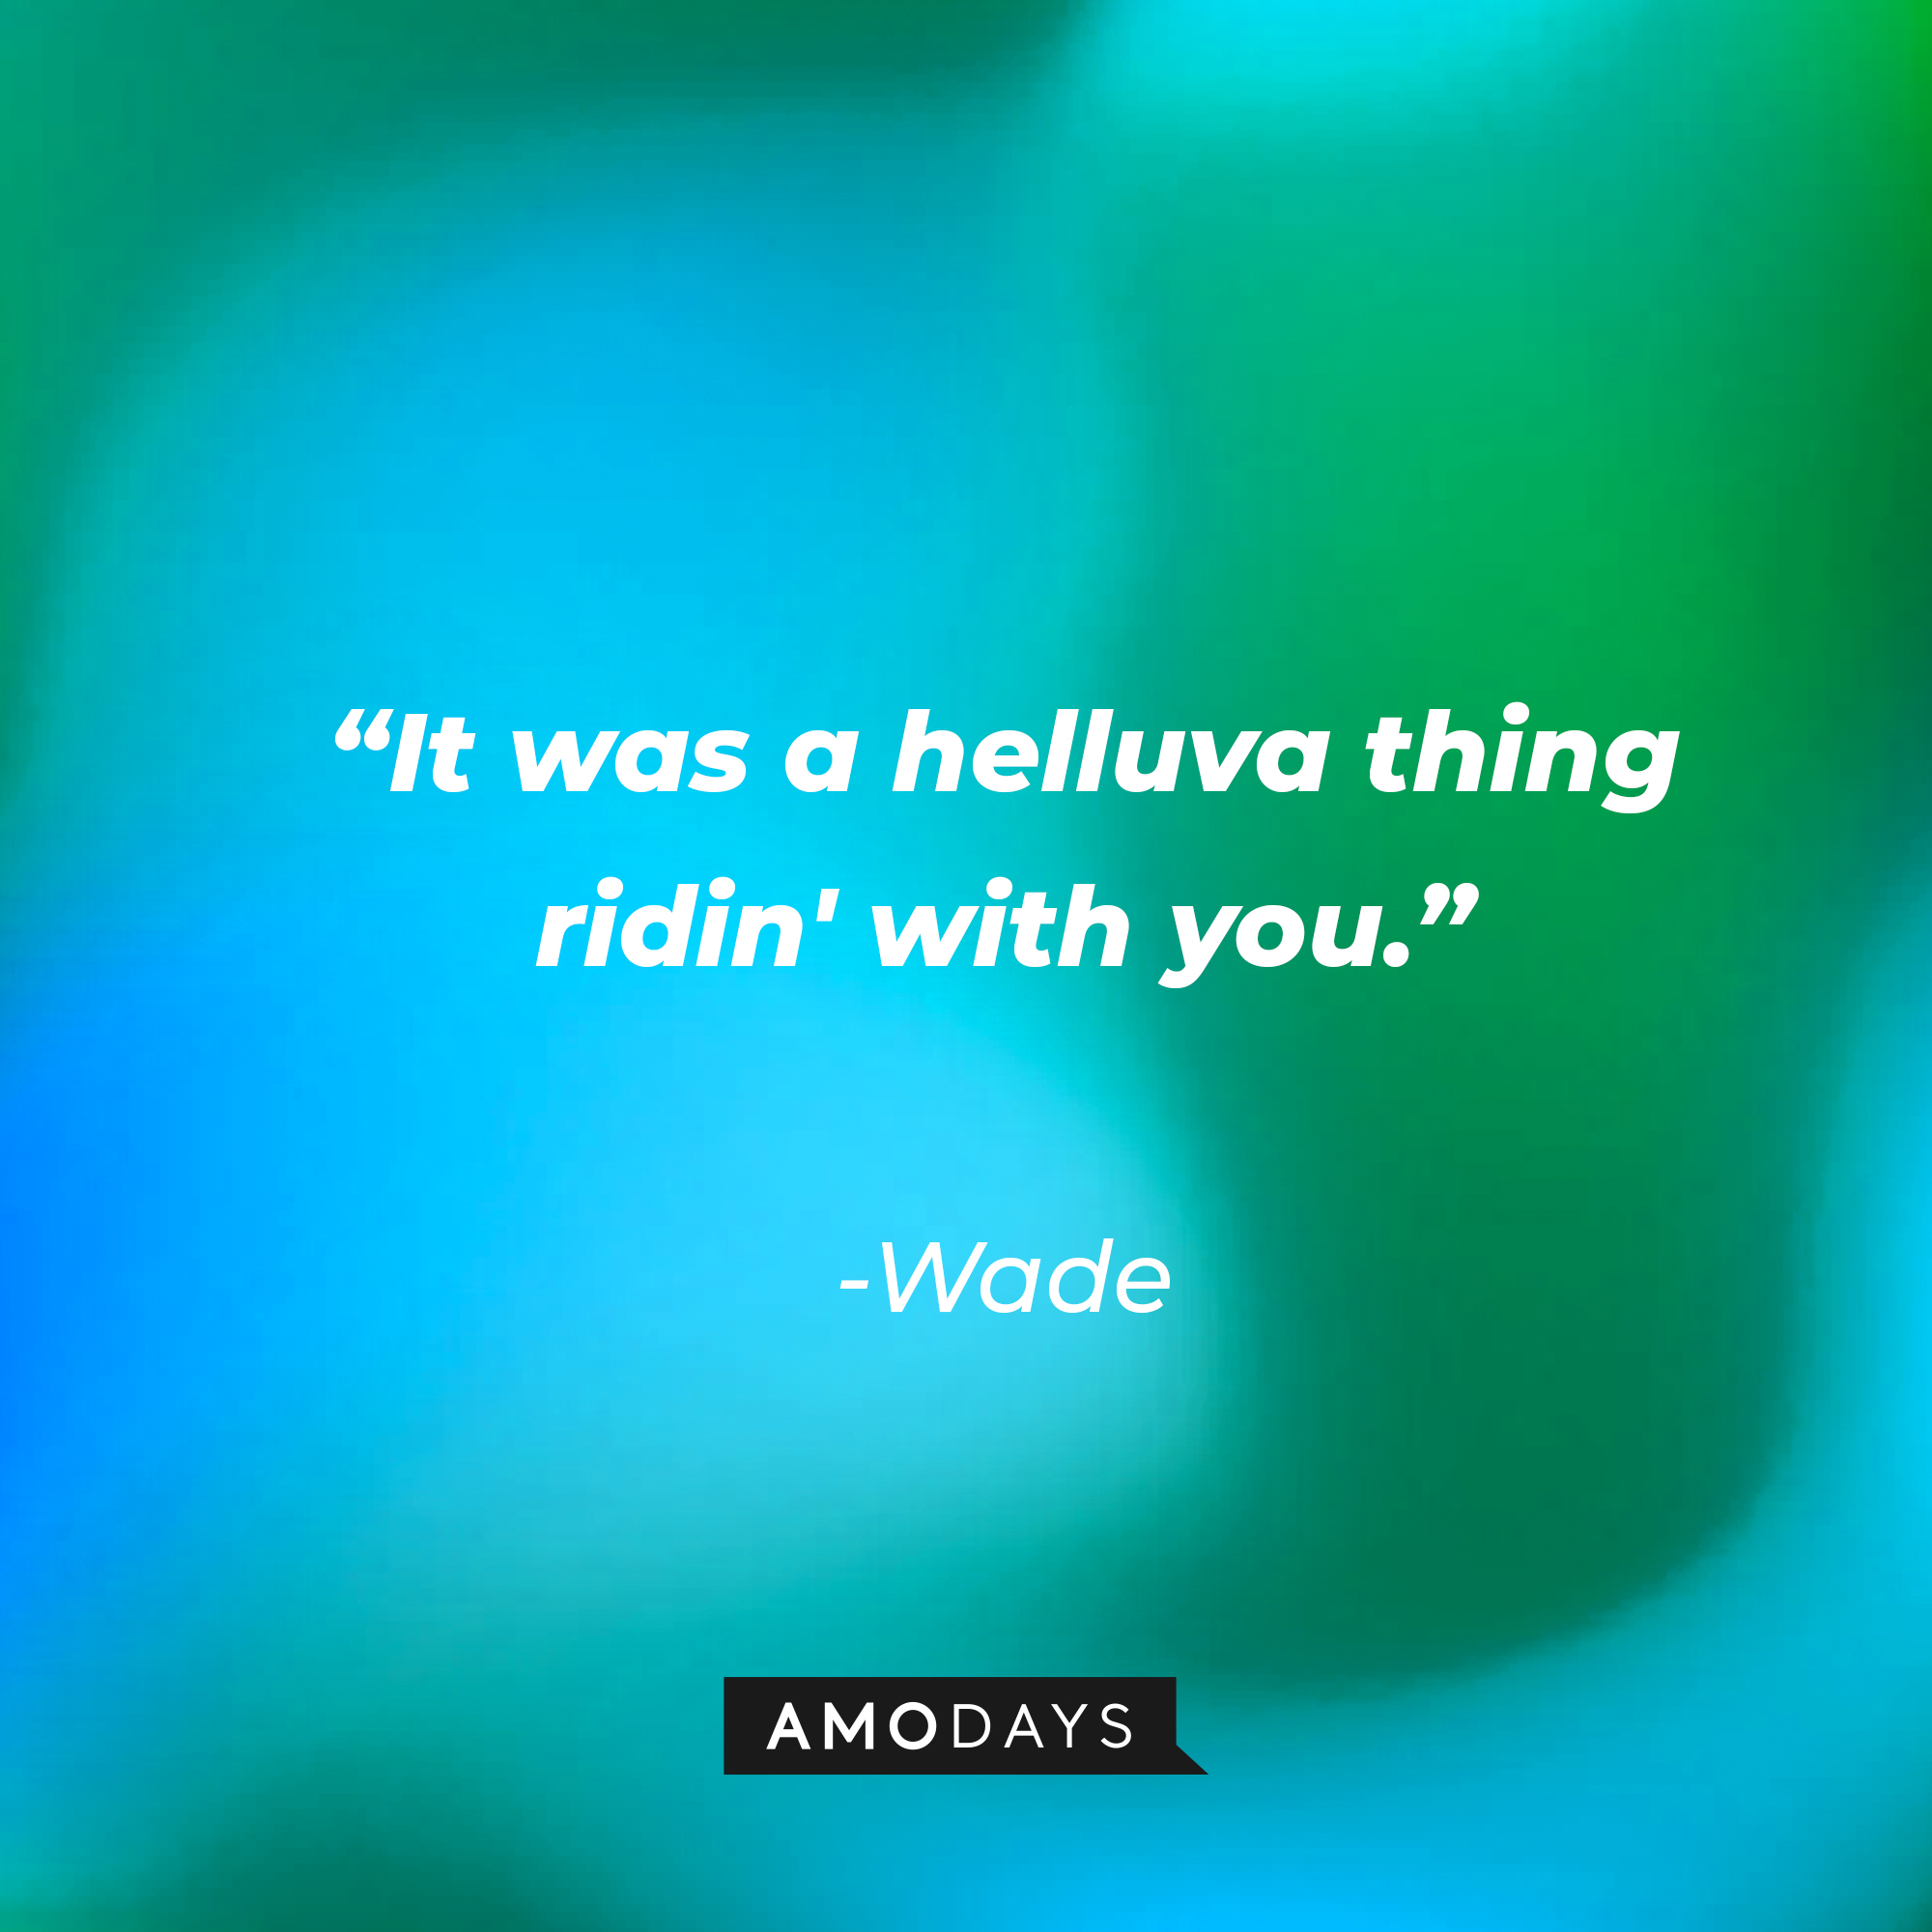 Wade’s quote: “It was a helluva thing ridin' with you.” | Source: AmoDays